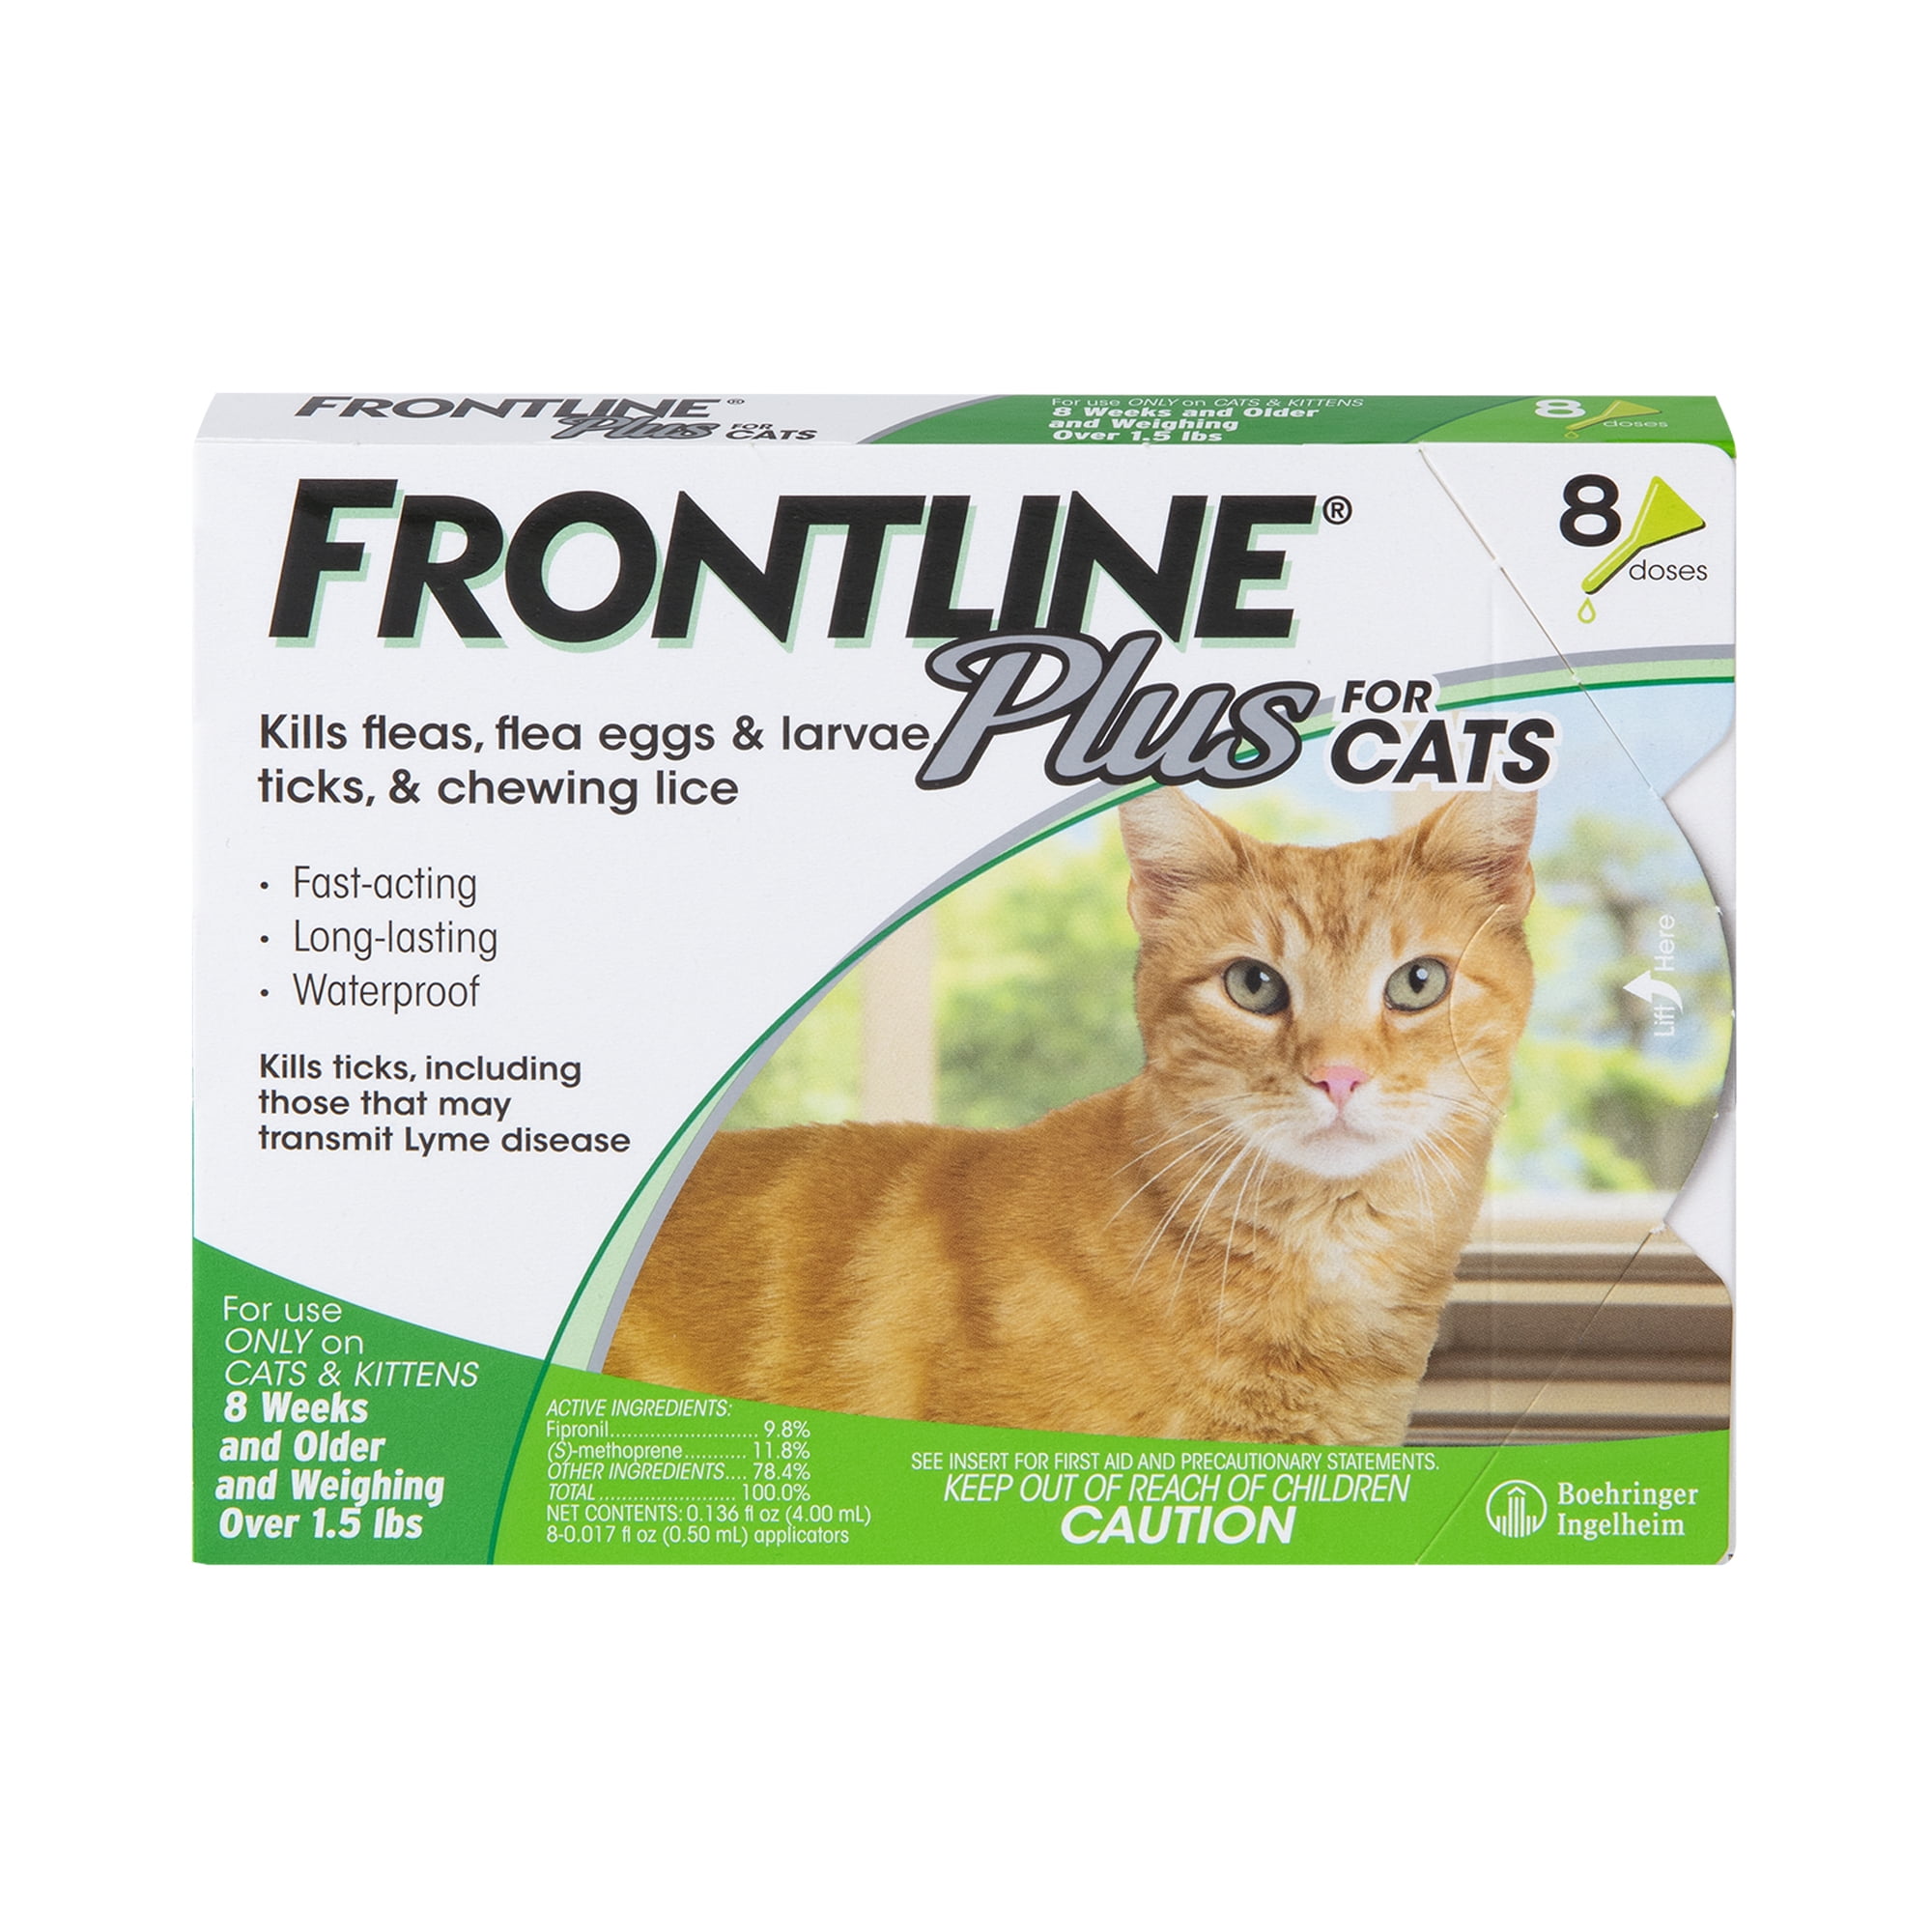 Frontline Plus For Cats And Kittens 1 5 Lbs And Over Flea And Tick Treatment 8 Doses Walmart Com